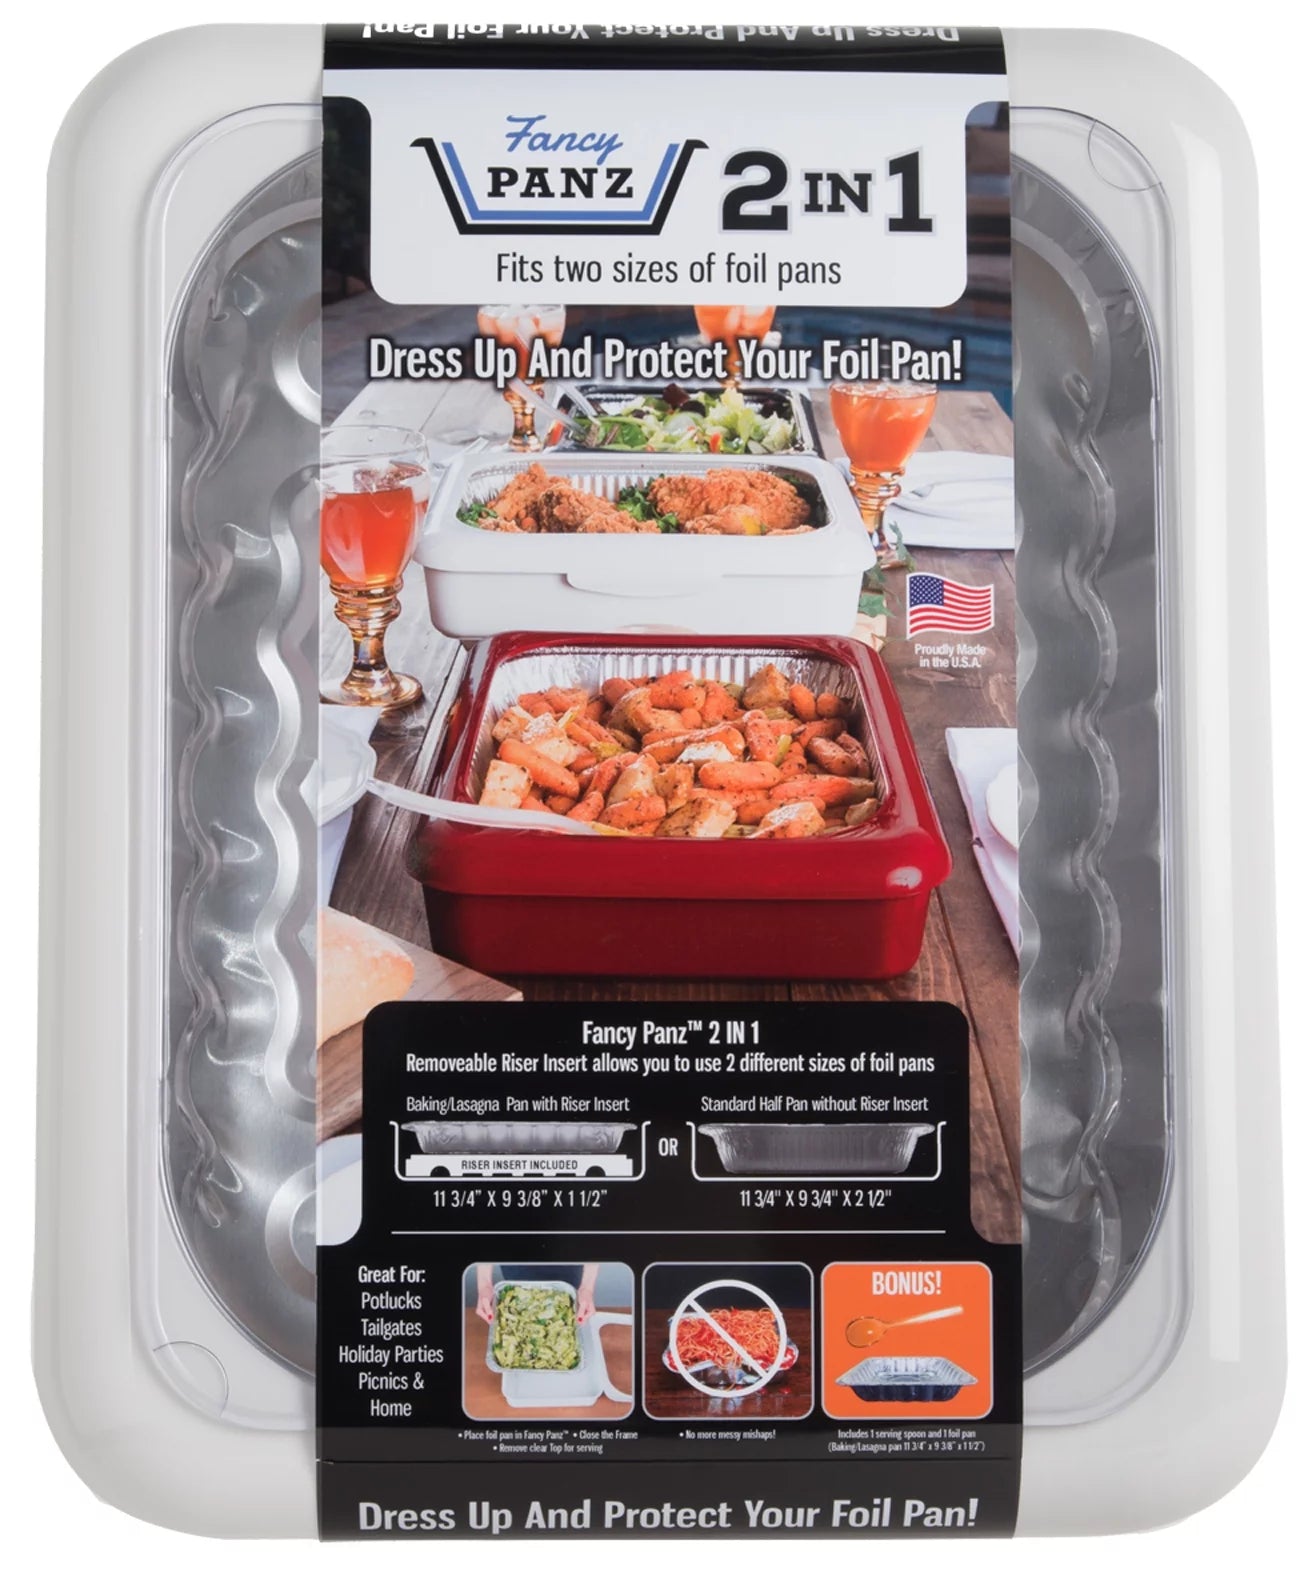 Fancy Panz Classic, Dress Up & Protect Your Foil Pan, Made in USA, Fits  Half Size Foil Pans. Foil Pan & Serving Spoon Included. Hot or Cold Food.